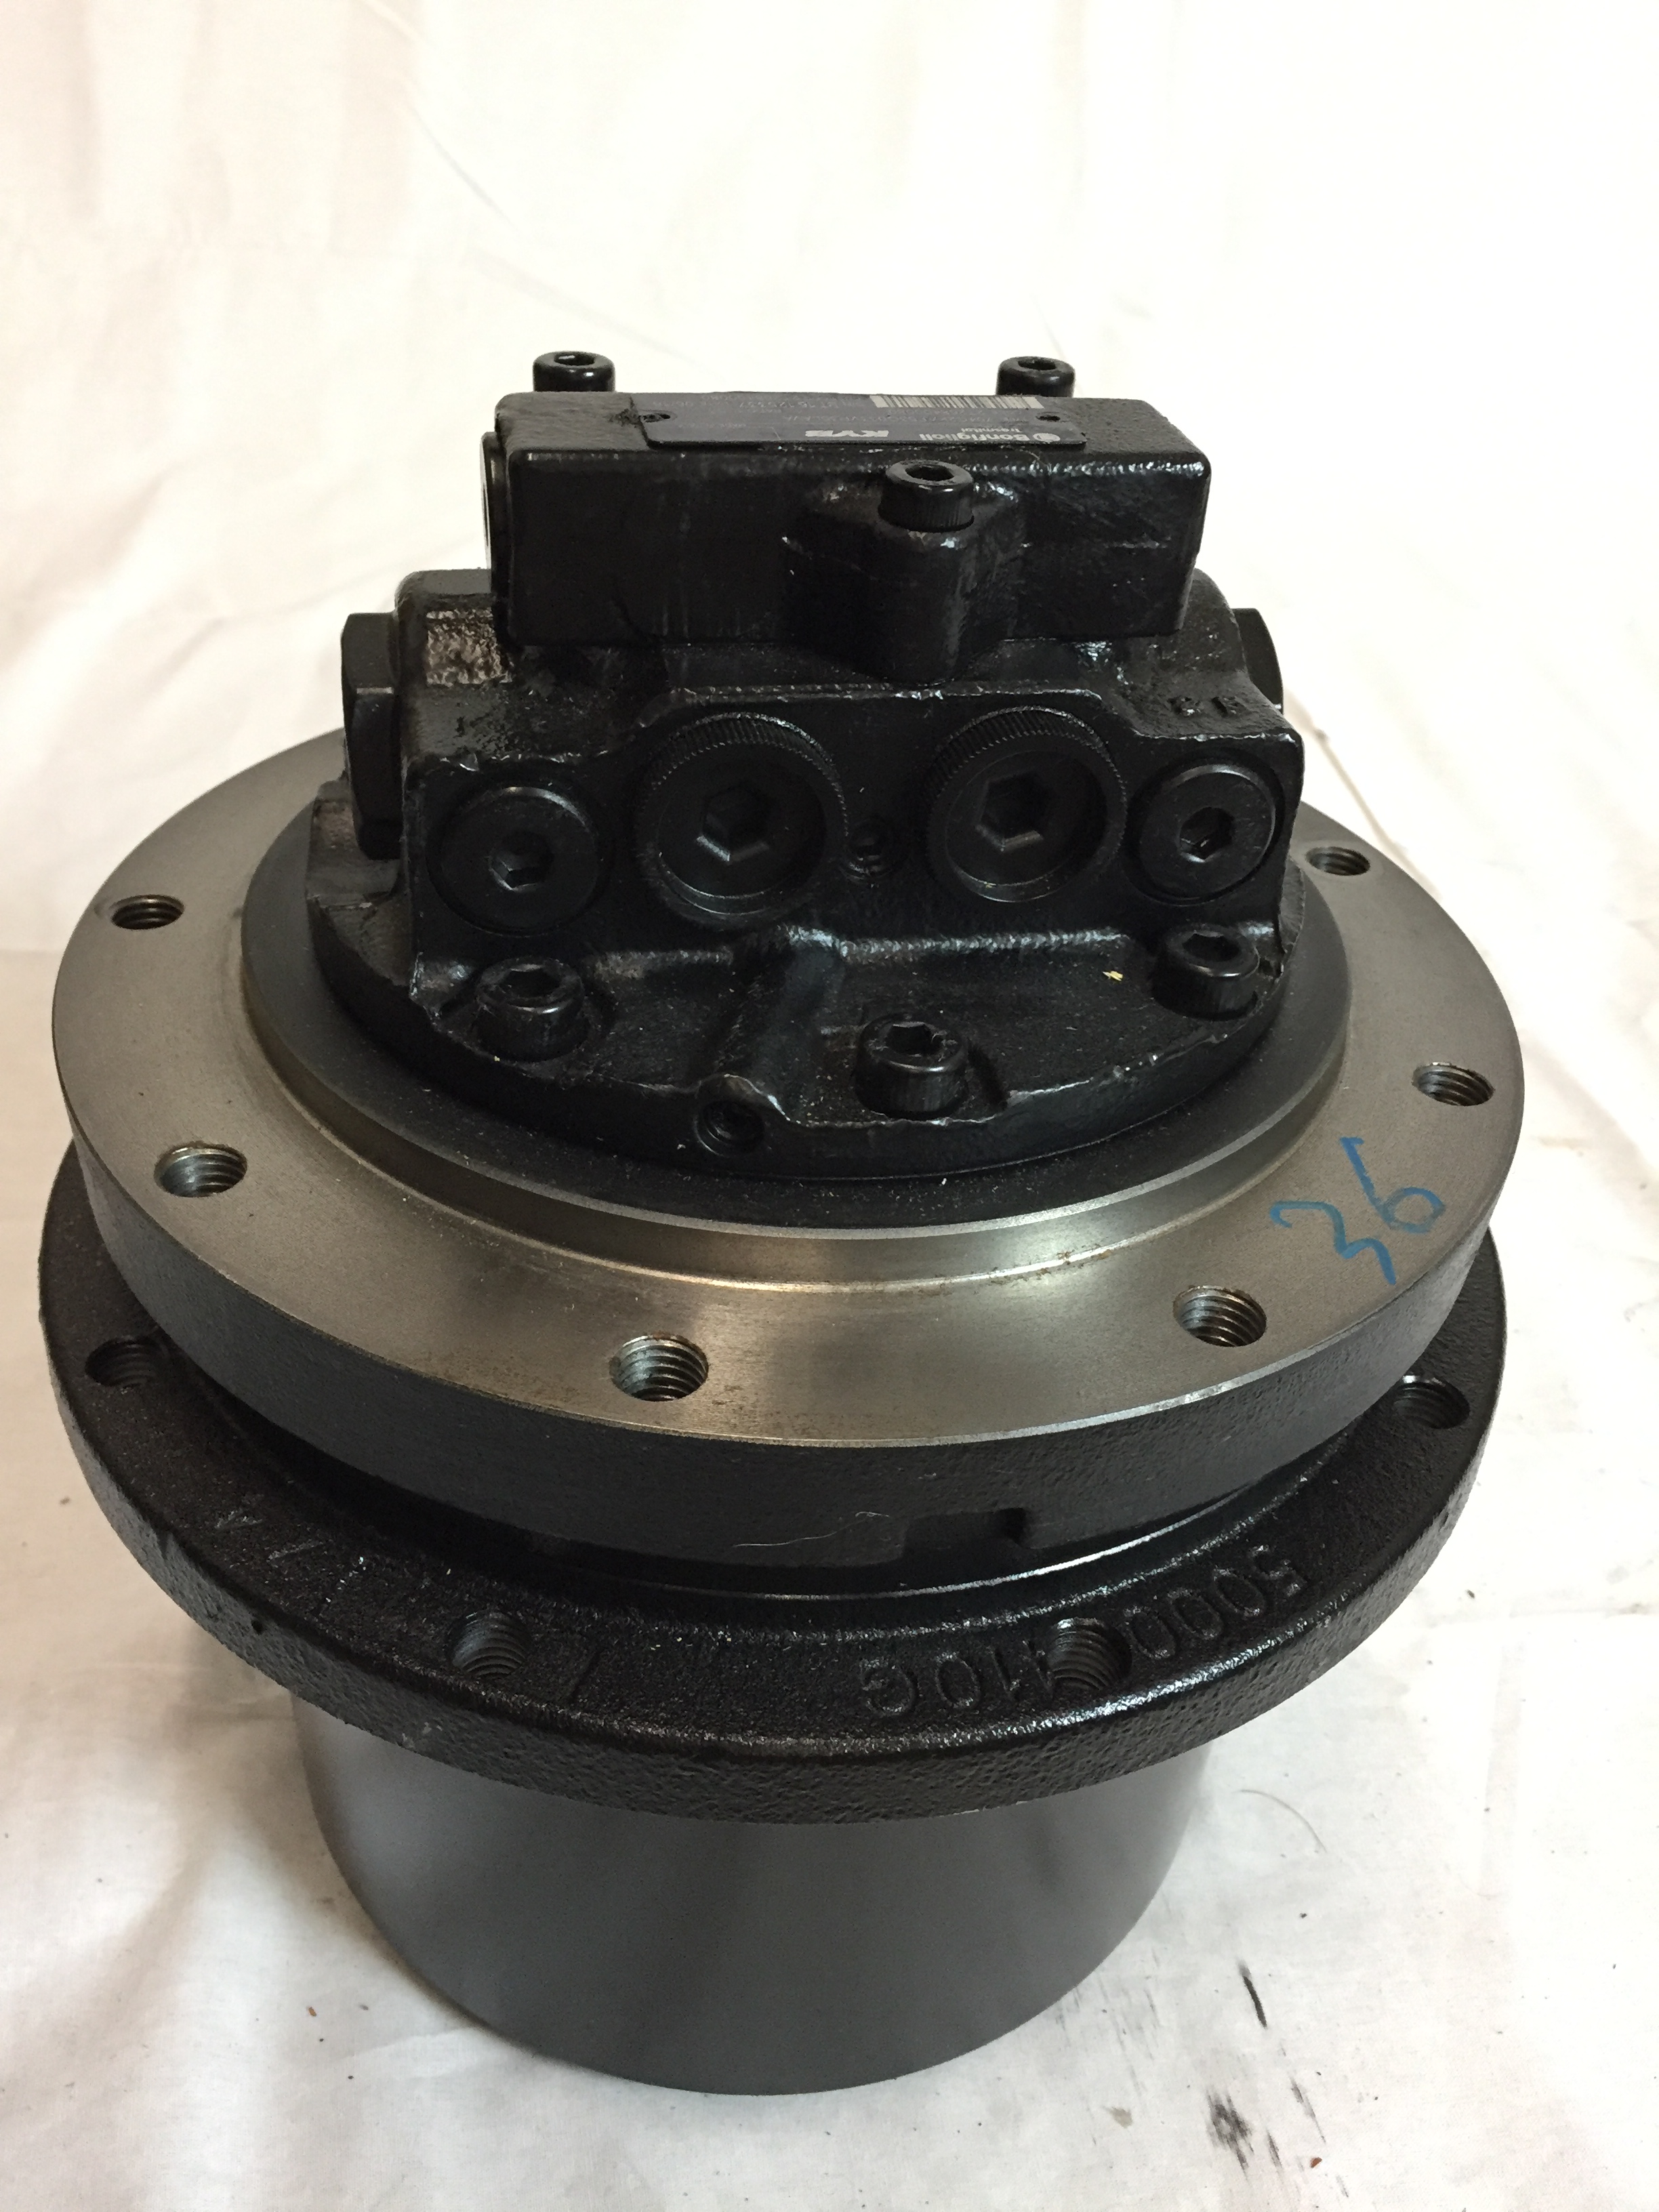 ZX50 Complete Final Drive (Planetary/Travel Drive) with Motor (LOW S/N 244001-274999) Part #4628892,0922101